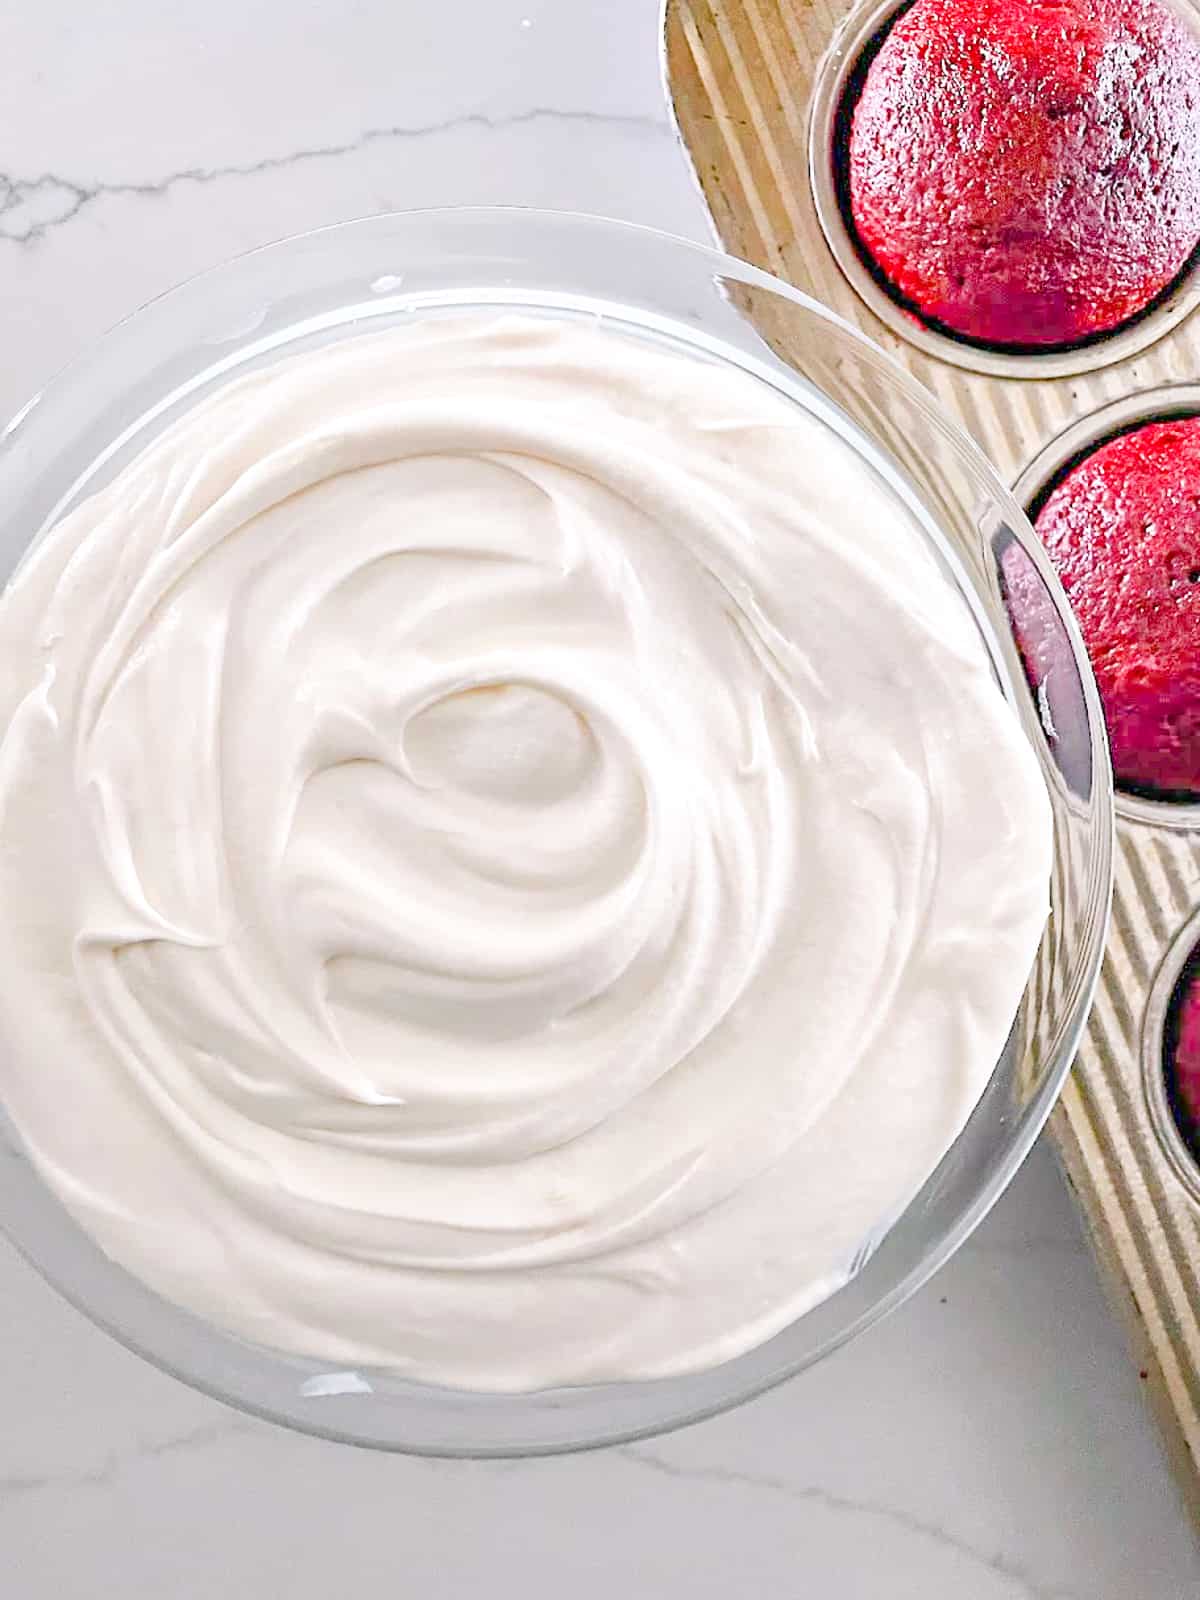 Ultimate cream cheese frosting